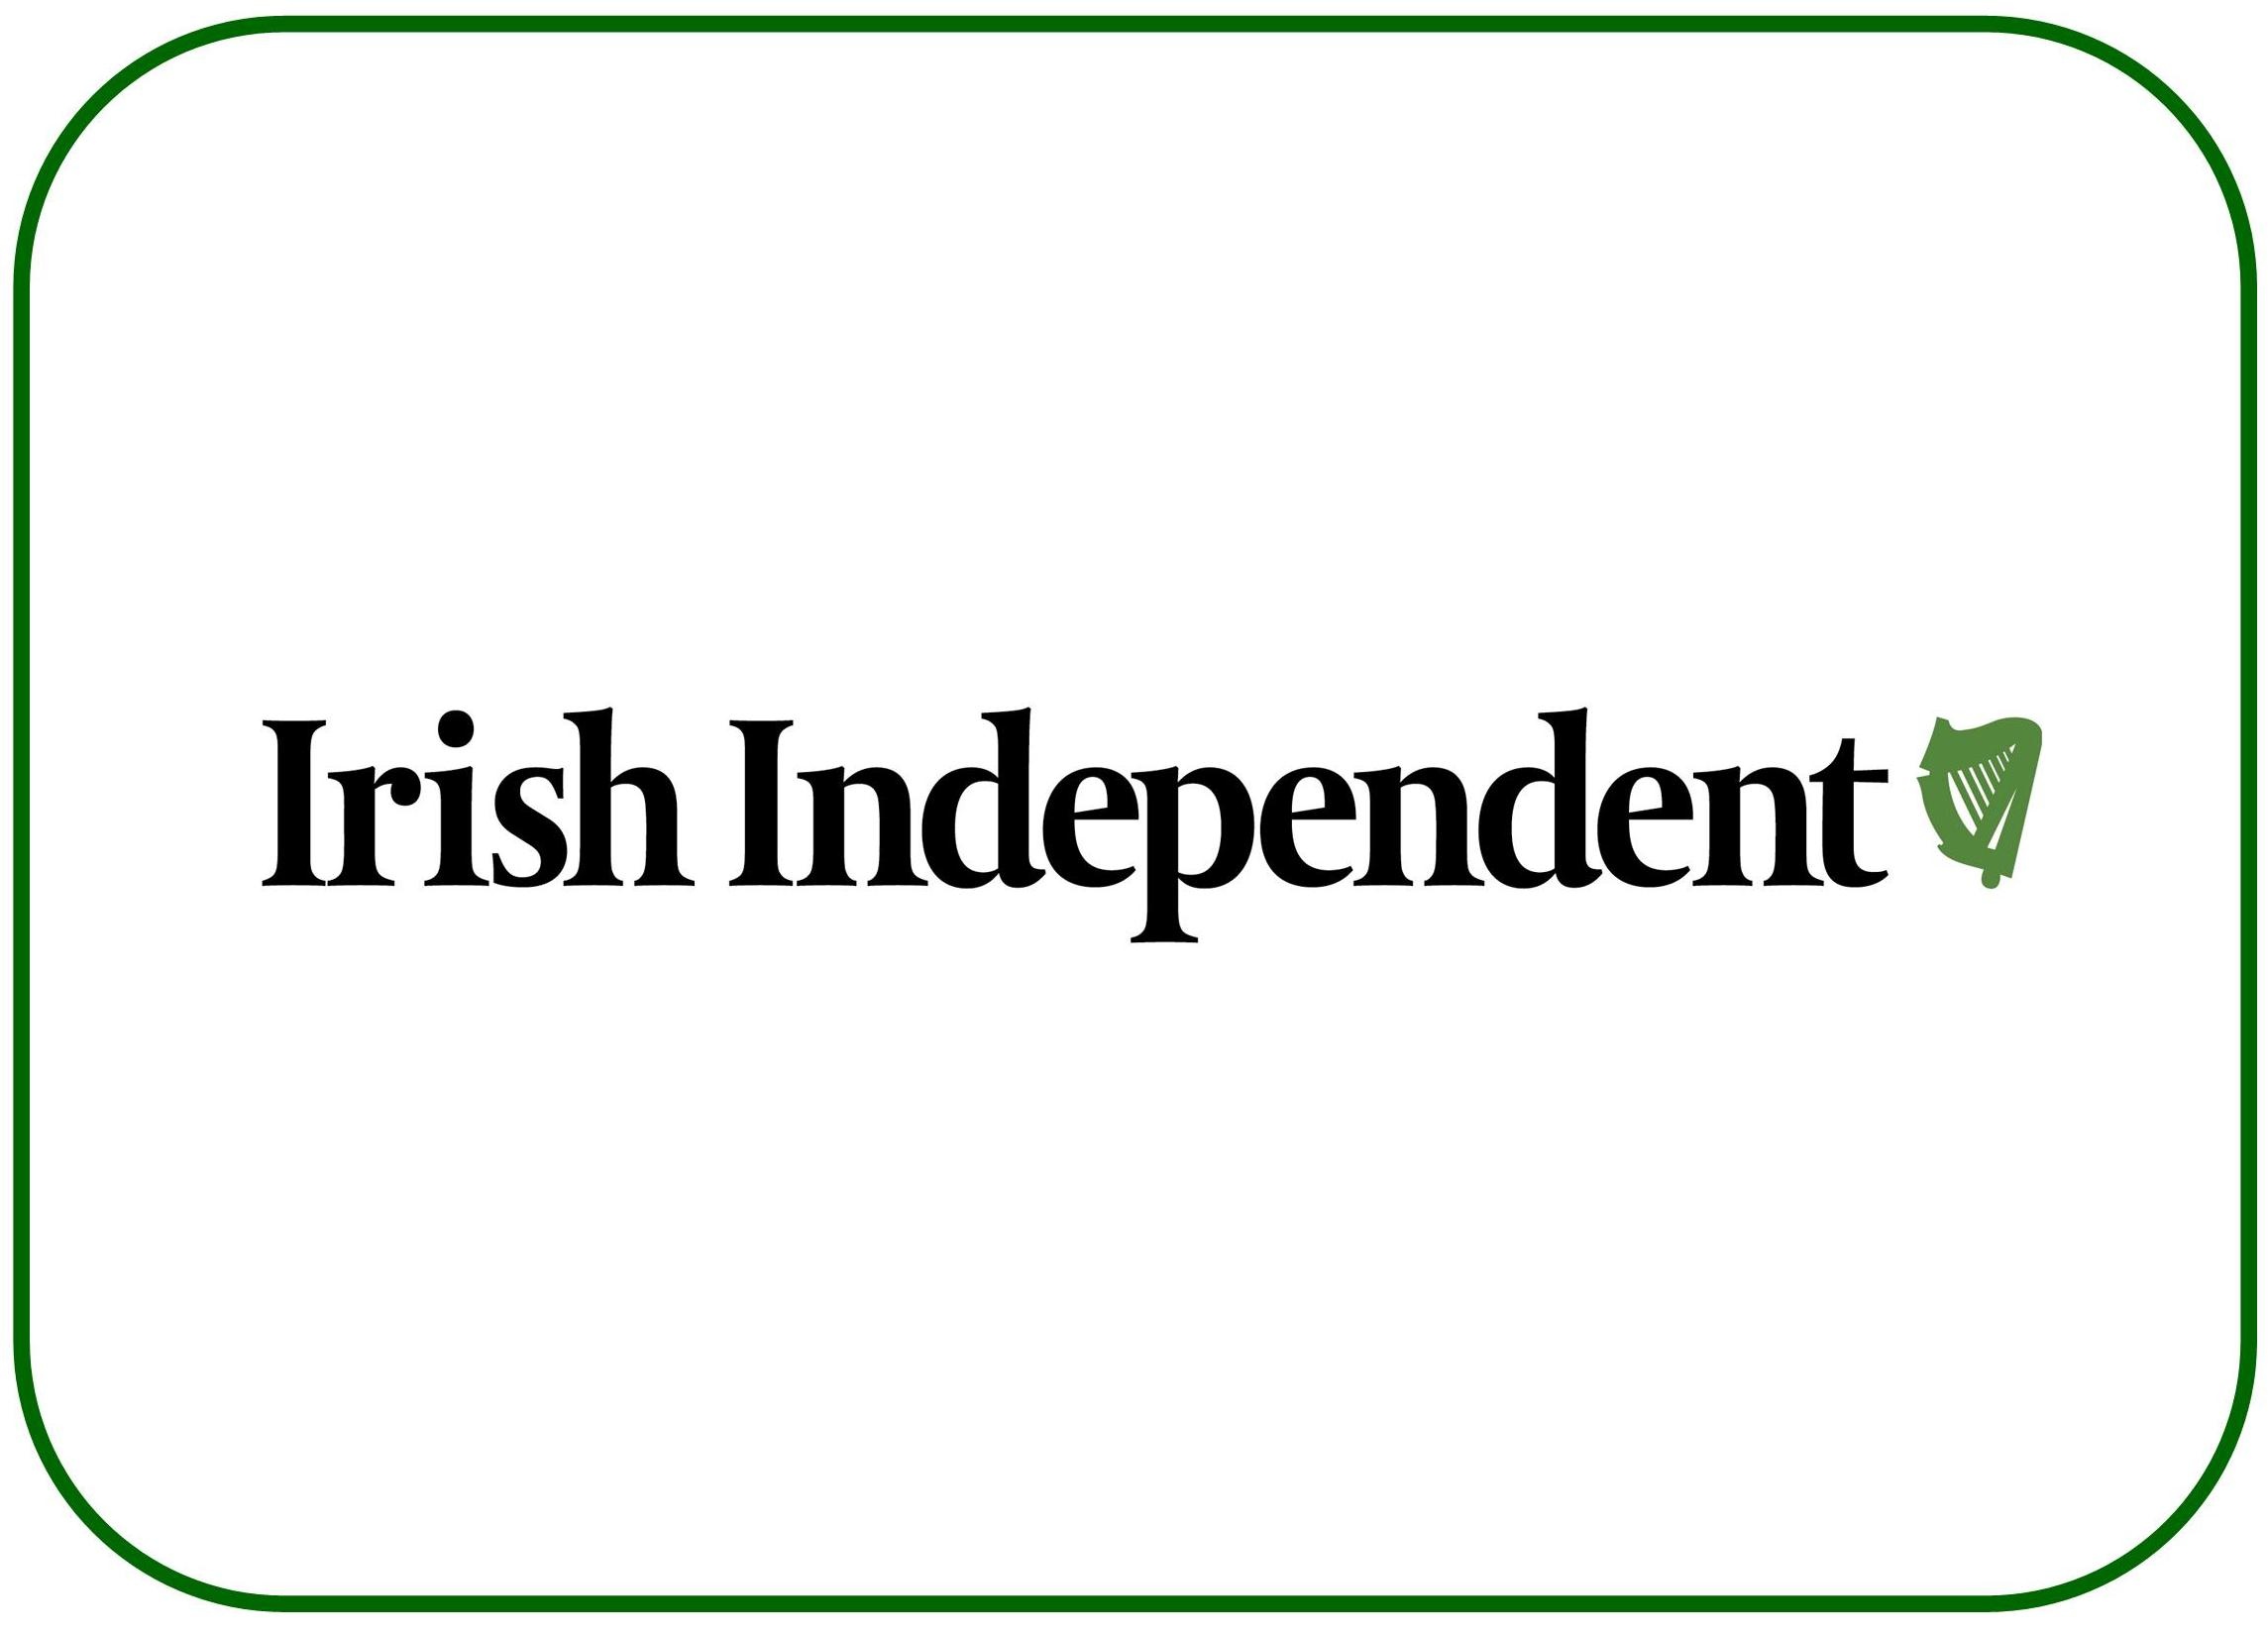 Multiculturalism and the culture of offence, Independent Ireland, 6 December 2015